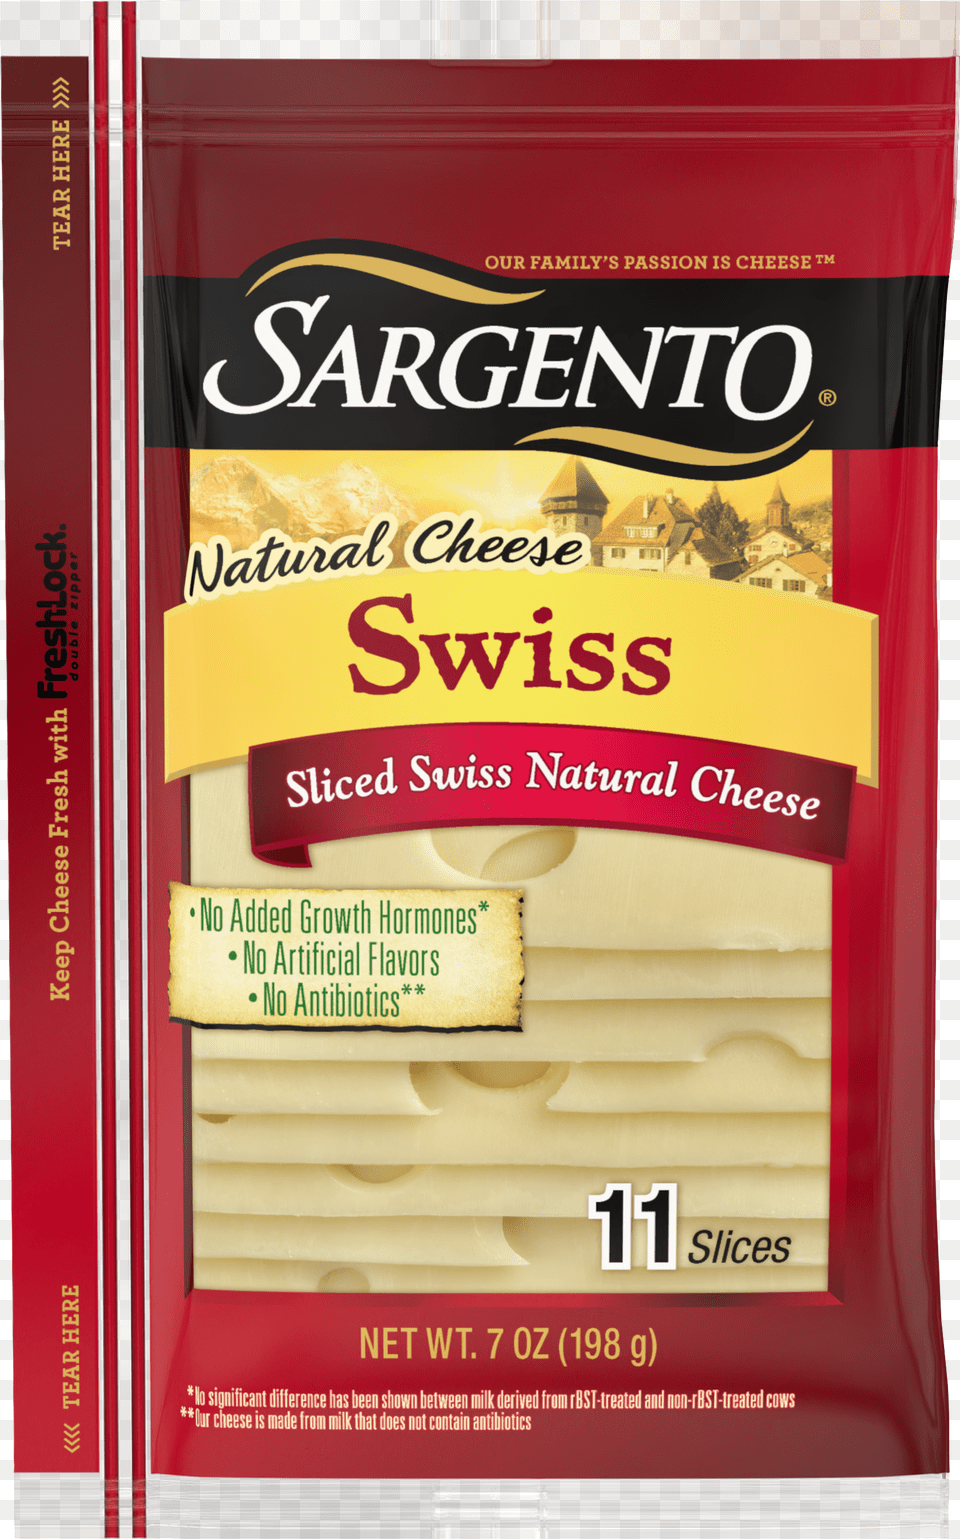 Sargento Sliced Swiss Natural Cheesequotclassquotimg Mozzarella Cheese Slices Png